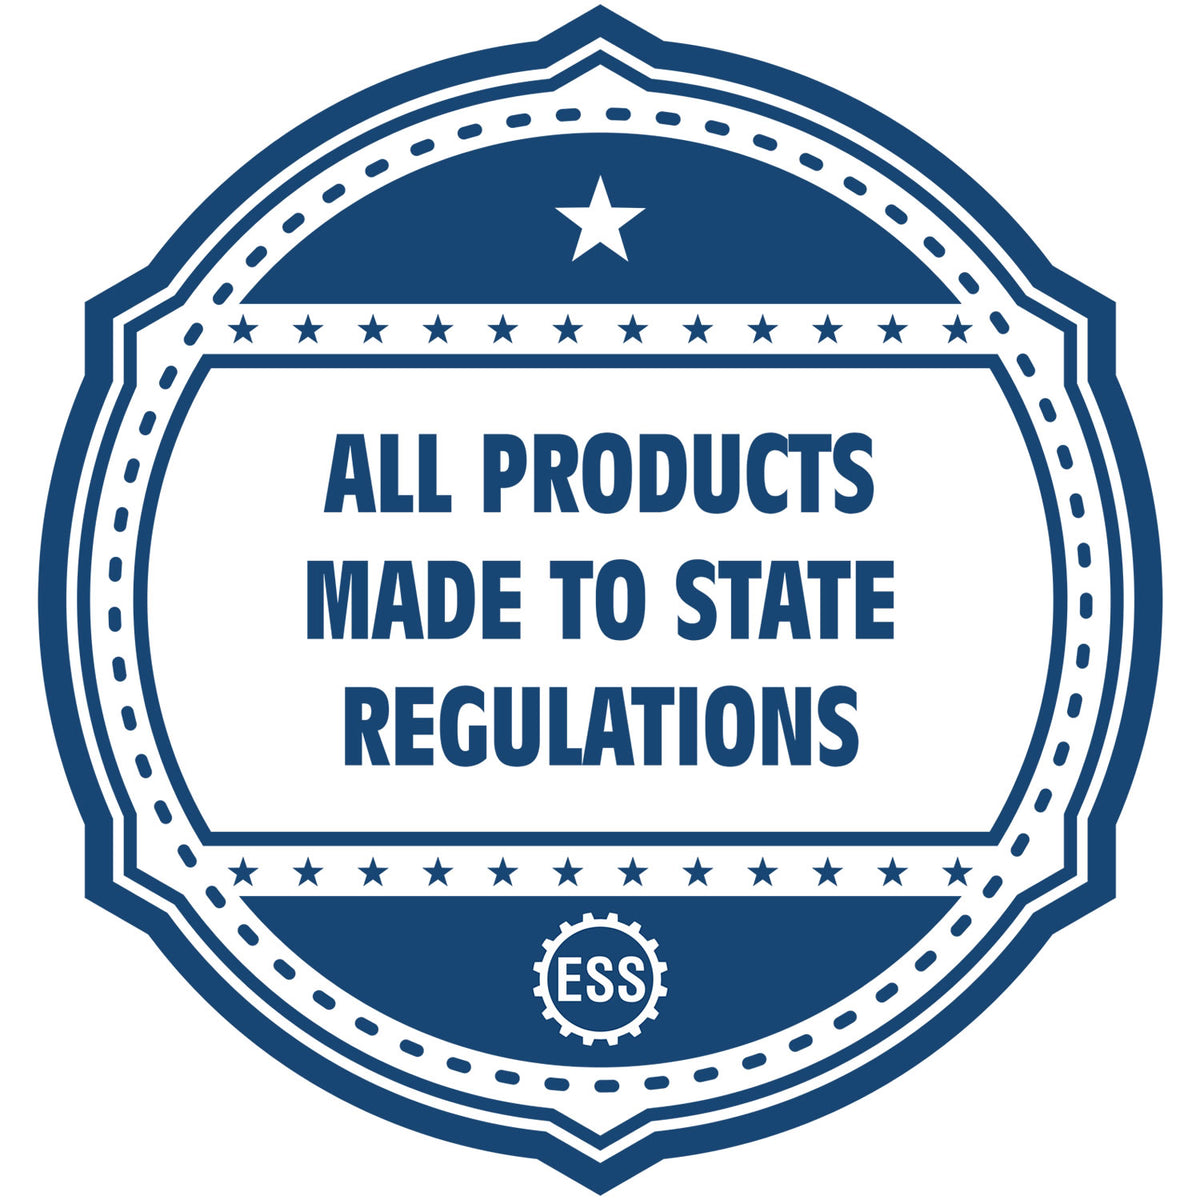 An icon or badge element for the Self-Inking Rectangular Indiana Notary Stamp showing that this product is made in compliance with state regulations.